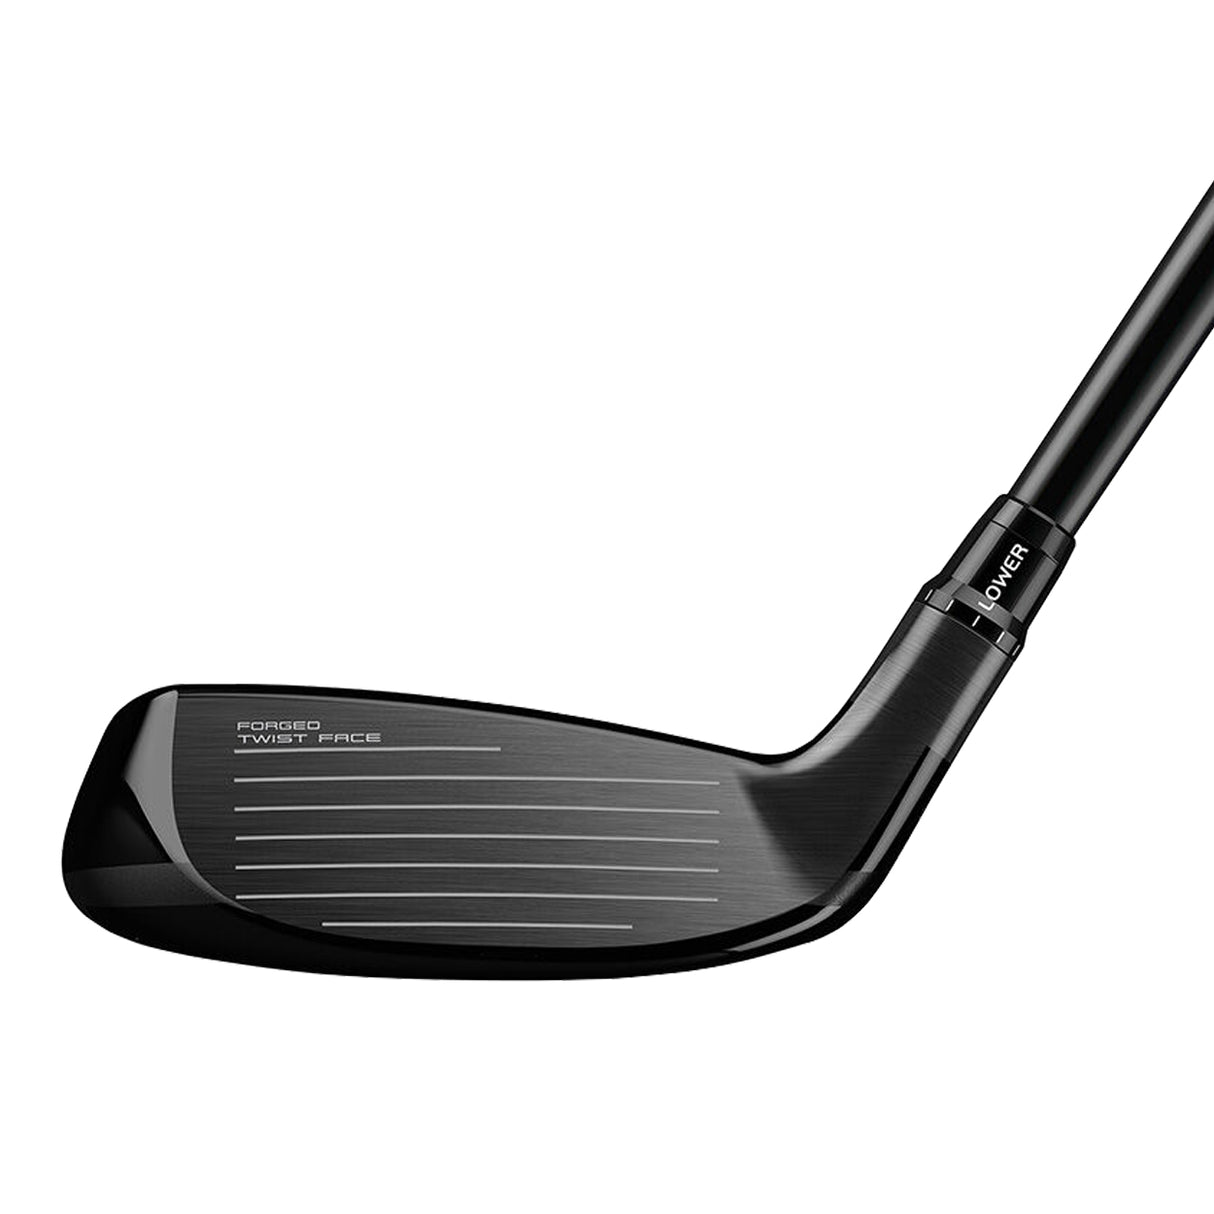 TaylorMade Golf SIM2 Rescue - Pre-Owned